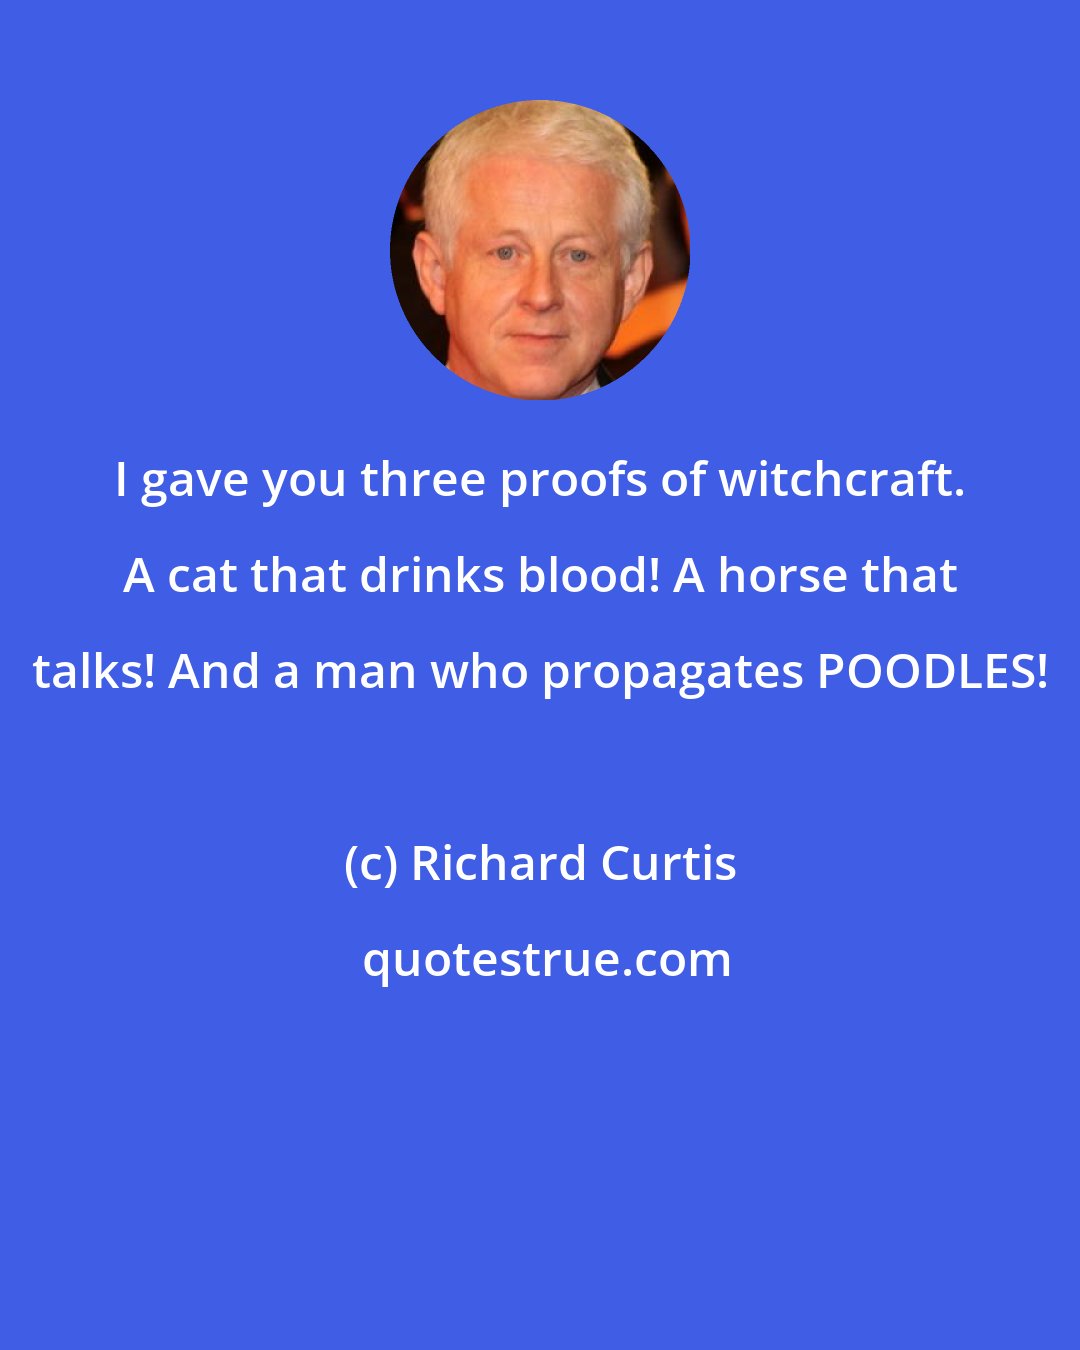 Richard Curtis: I gave you three proofs of witchcraft. A cat that drinks blood! A horse that talks! And a man who propagates POODLES!